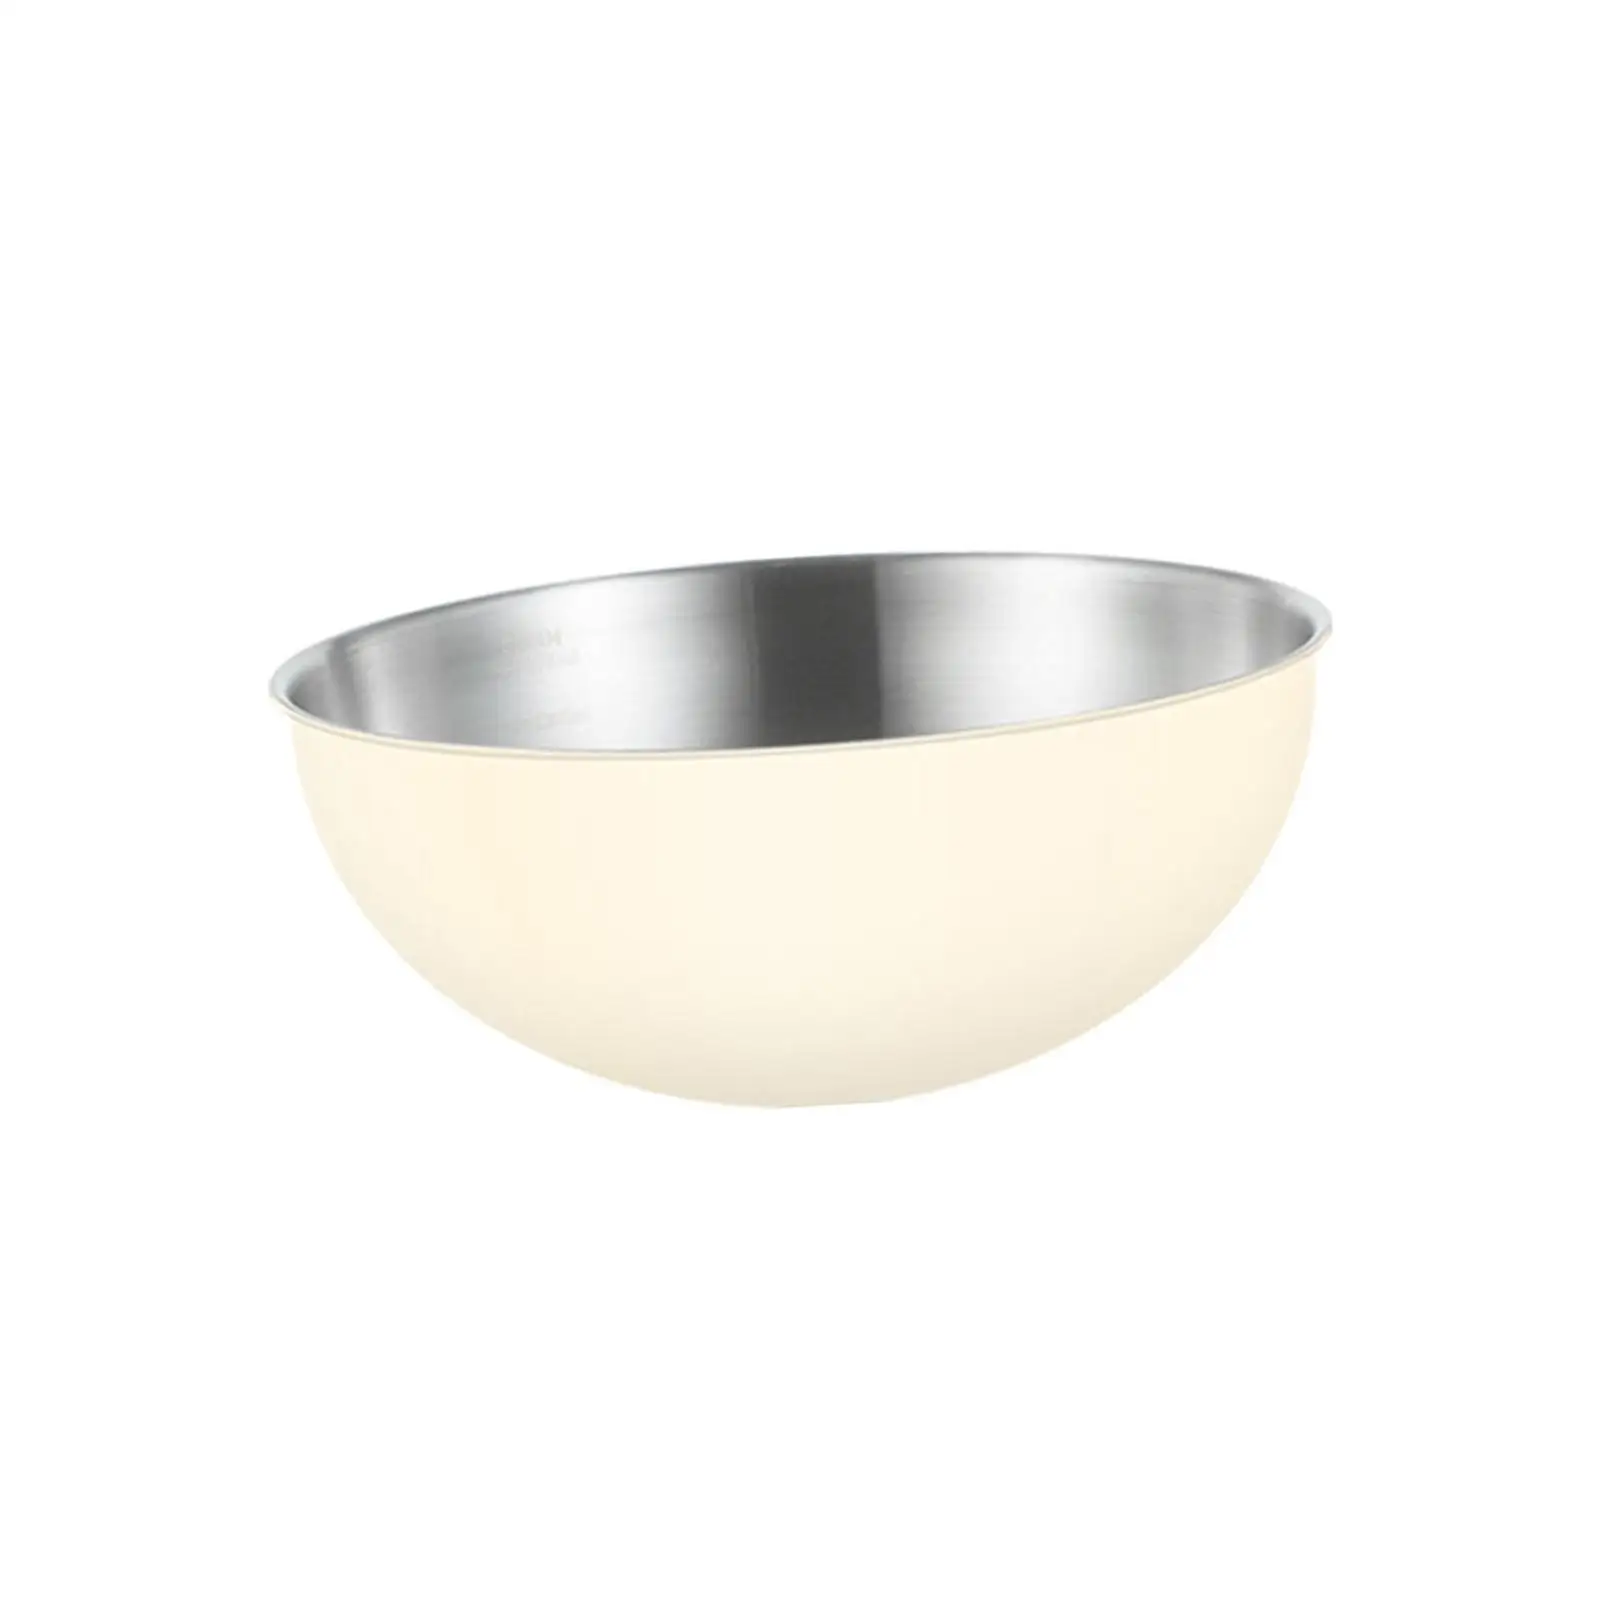 Serving Bowls Container Stainless Steel Durable Soup Bowls Salad Bowls for Party Restaurant Dining Table Kitchen